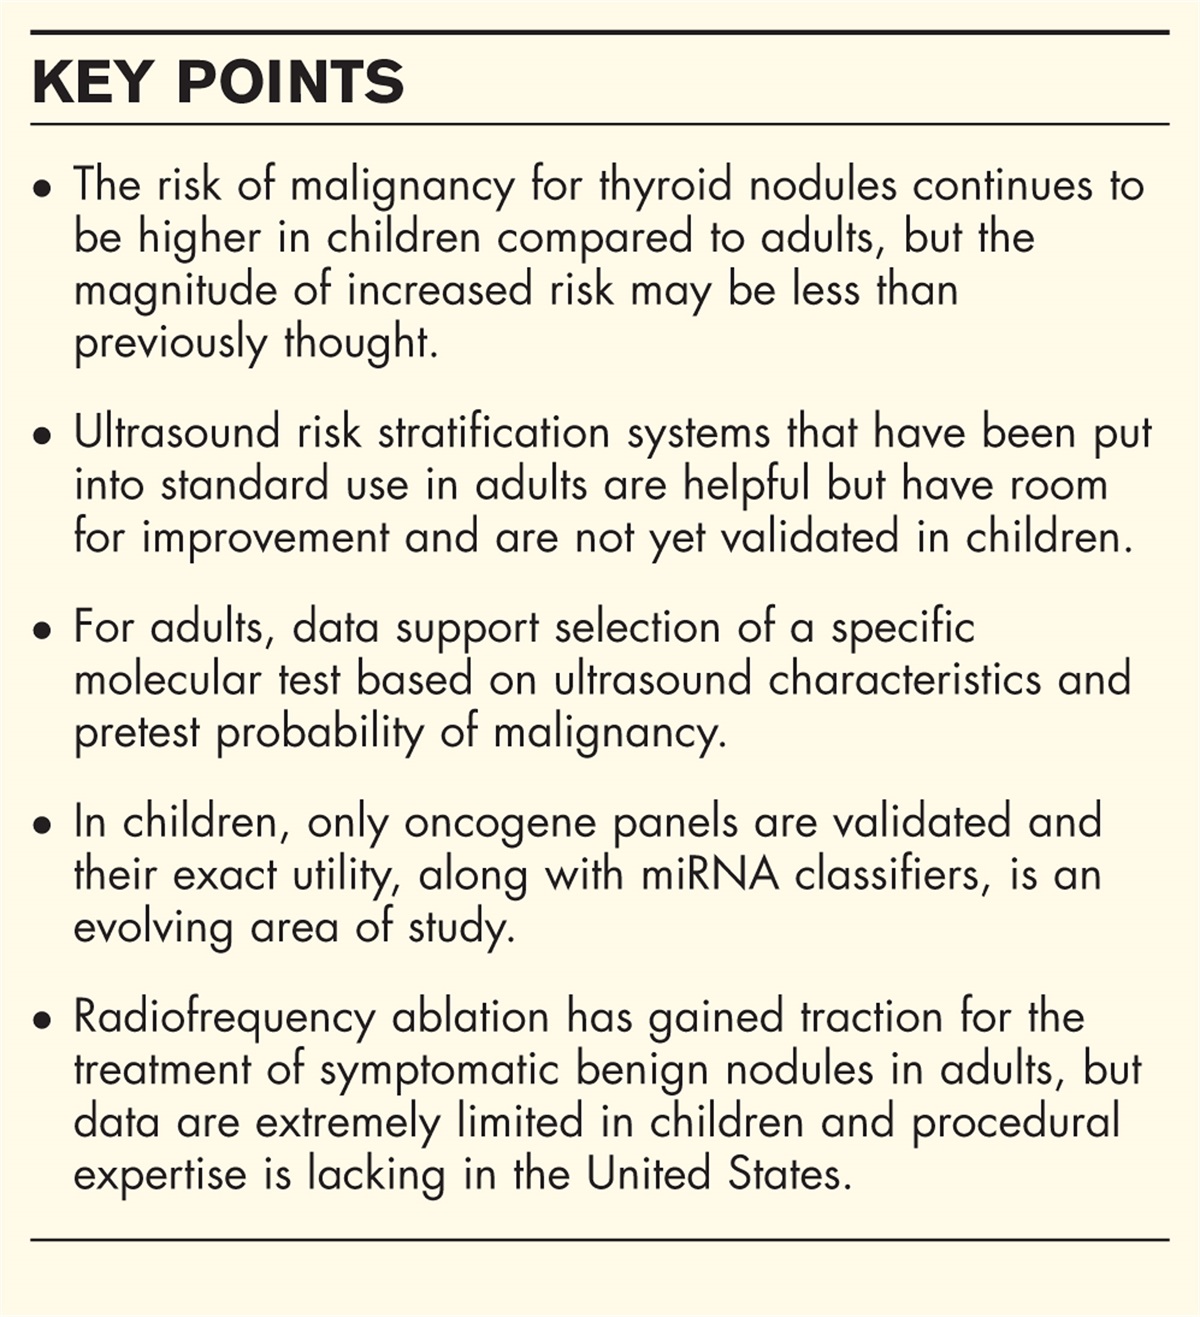 Differences in the management of thyroid nodules in children and adolescents as compared to adults